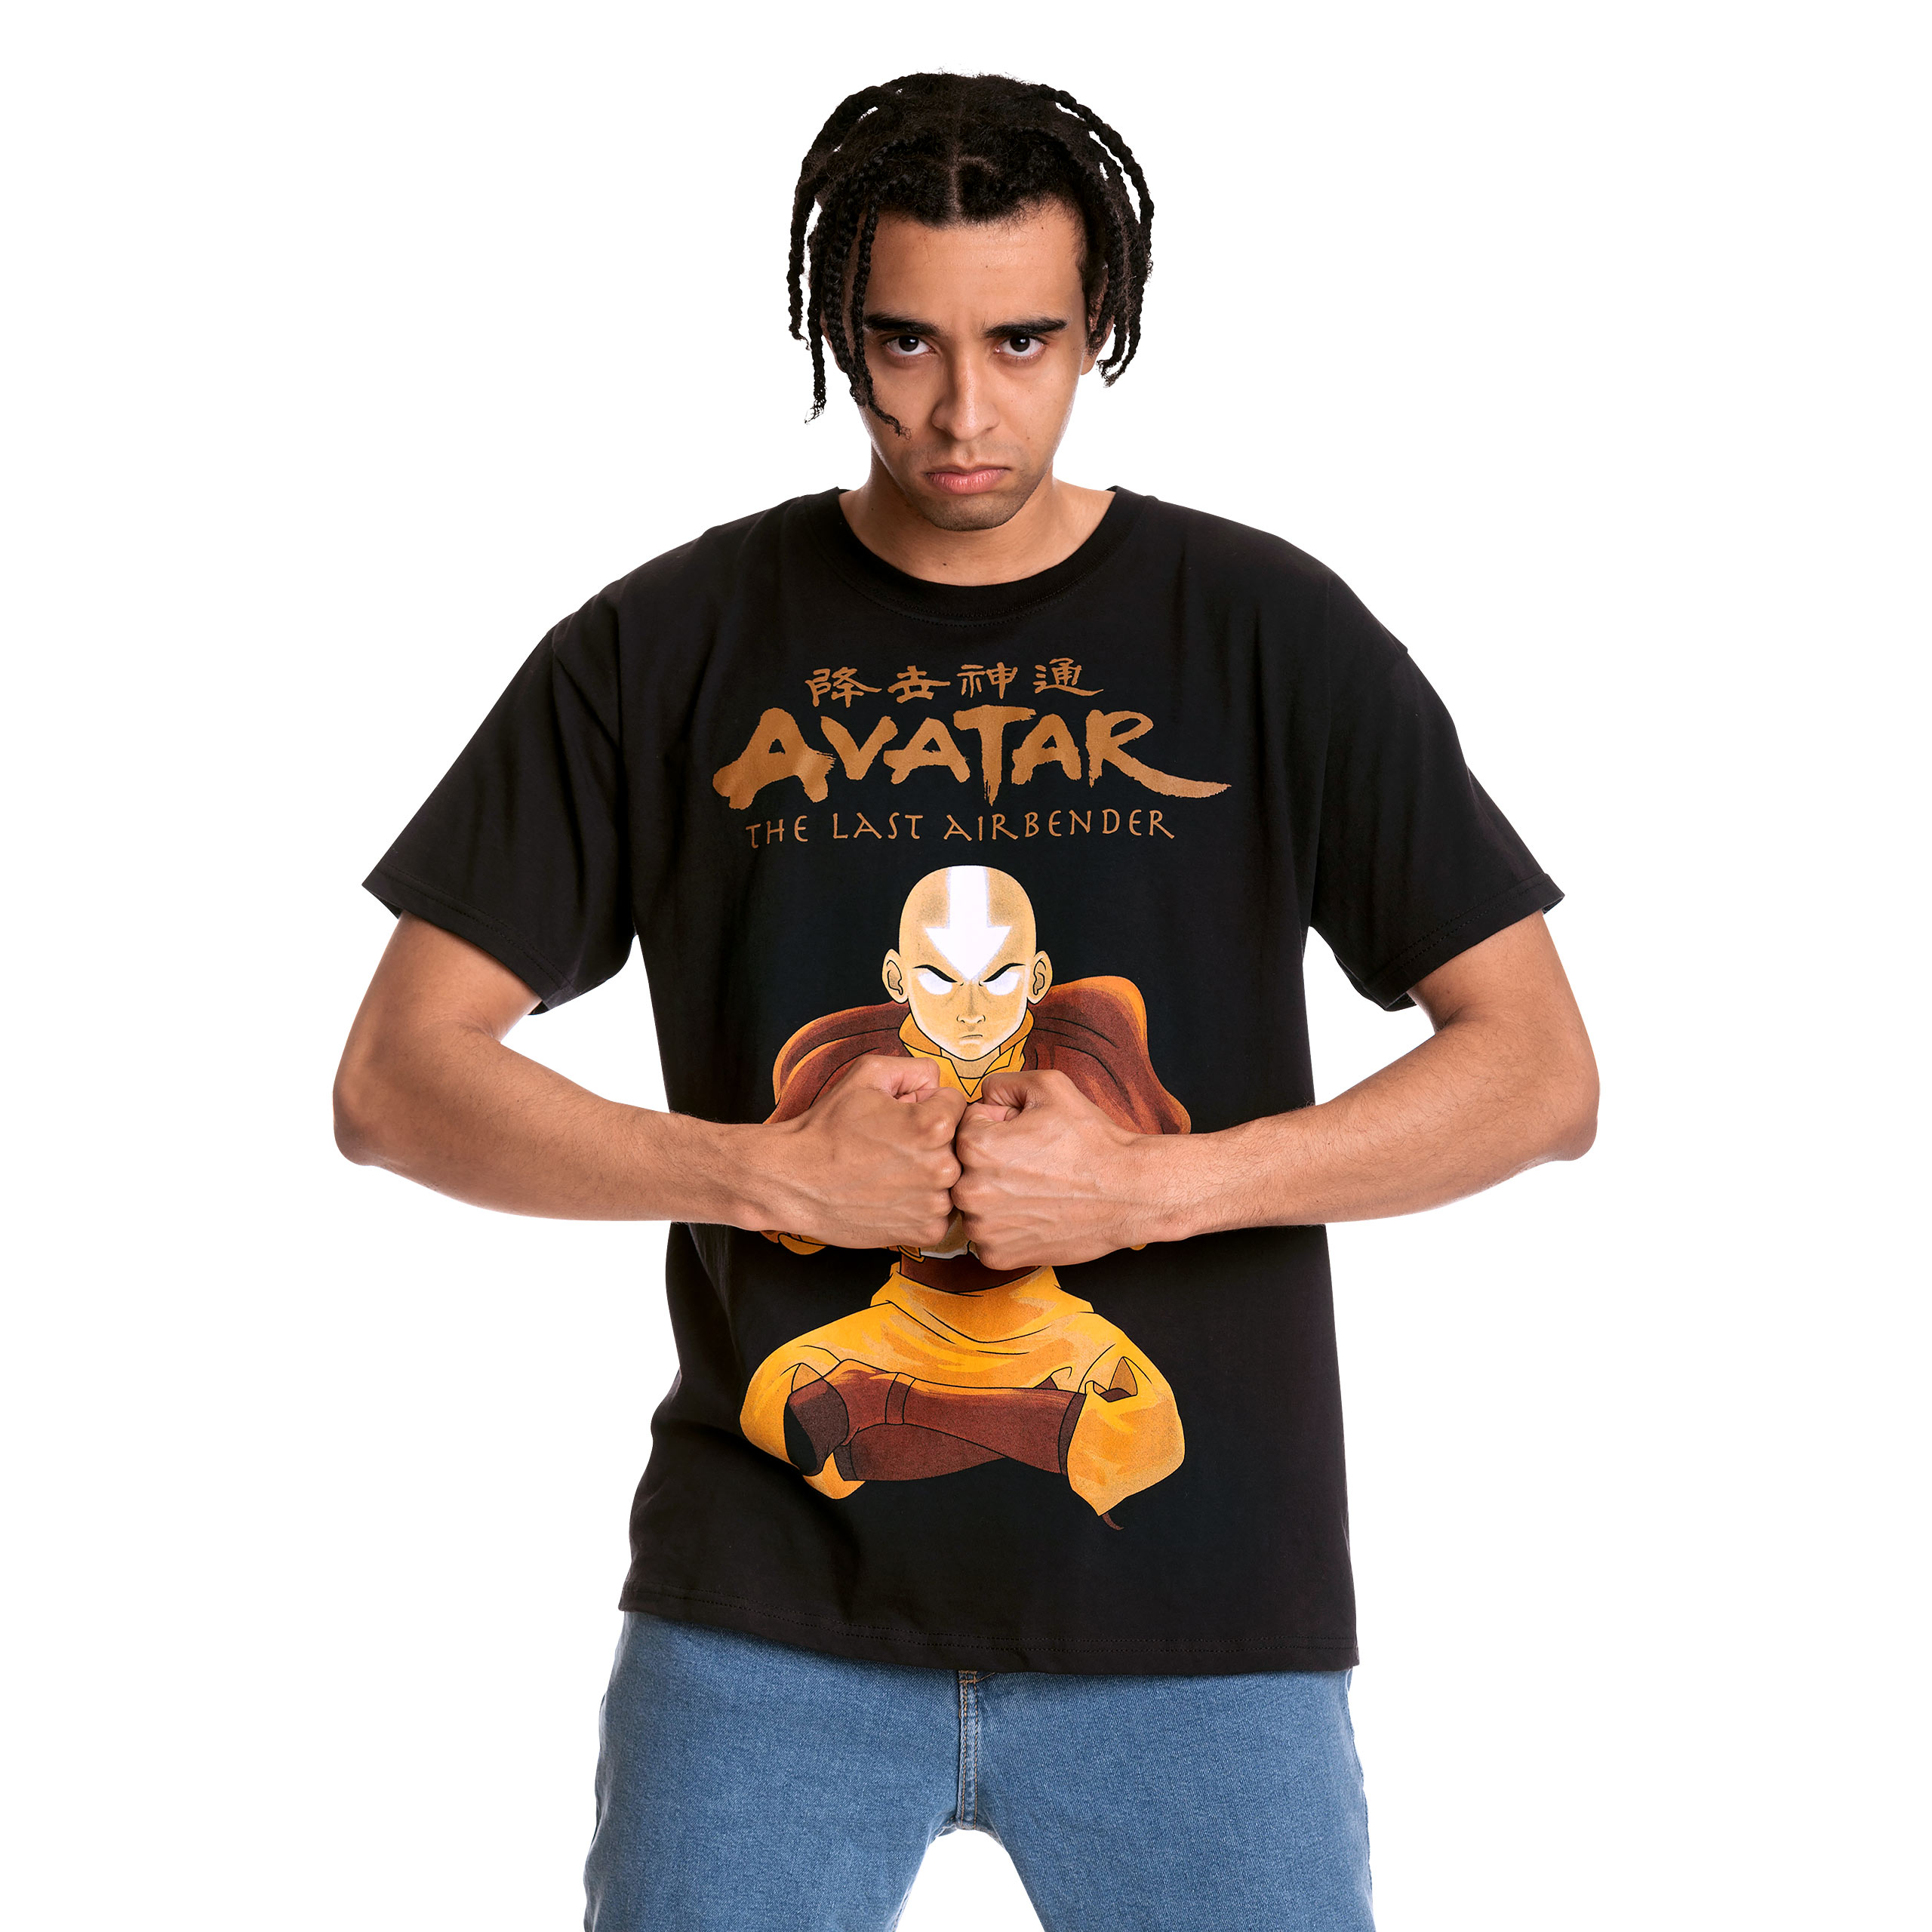 Avatar The Last Airbender - Aang State Pose T-Shirt Black